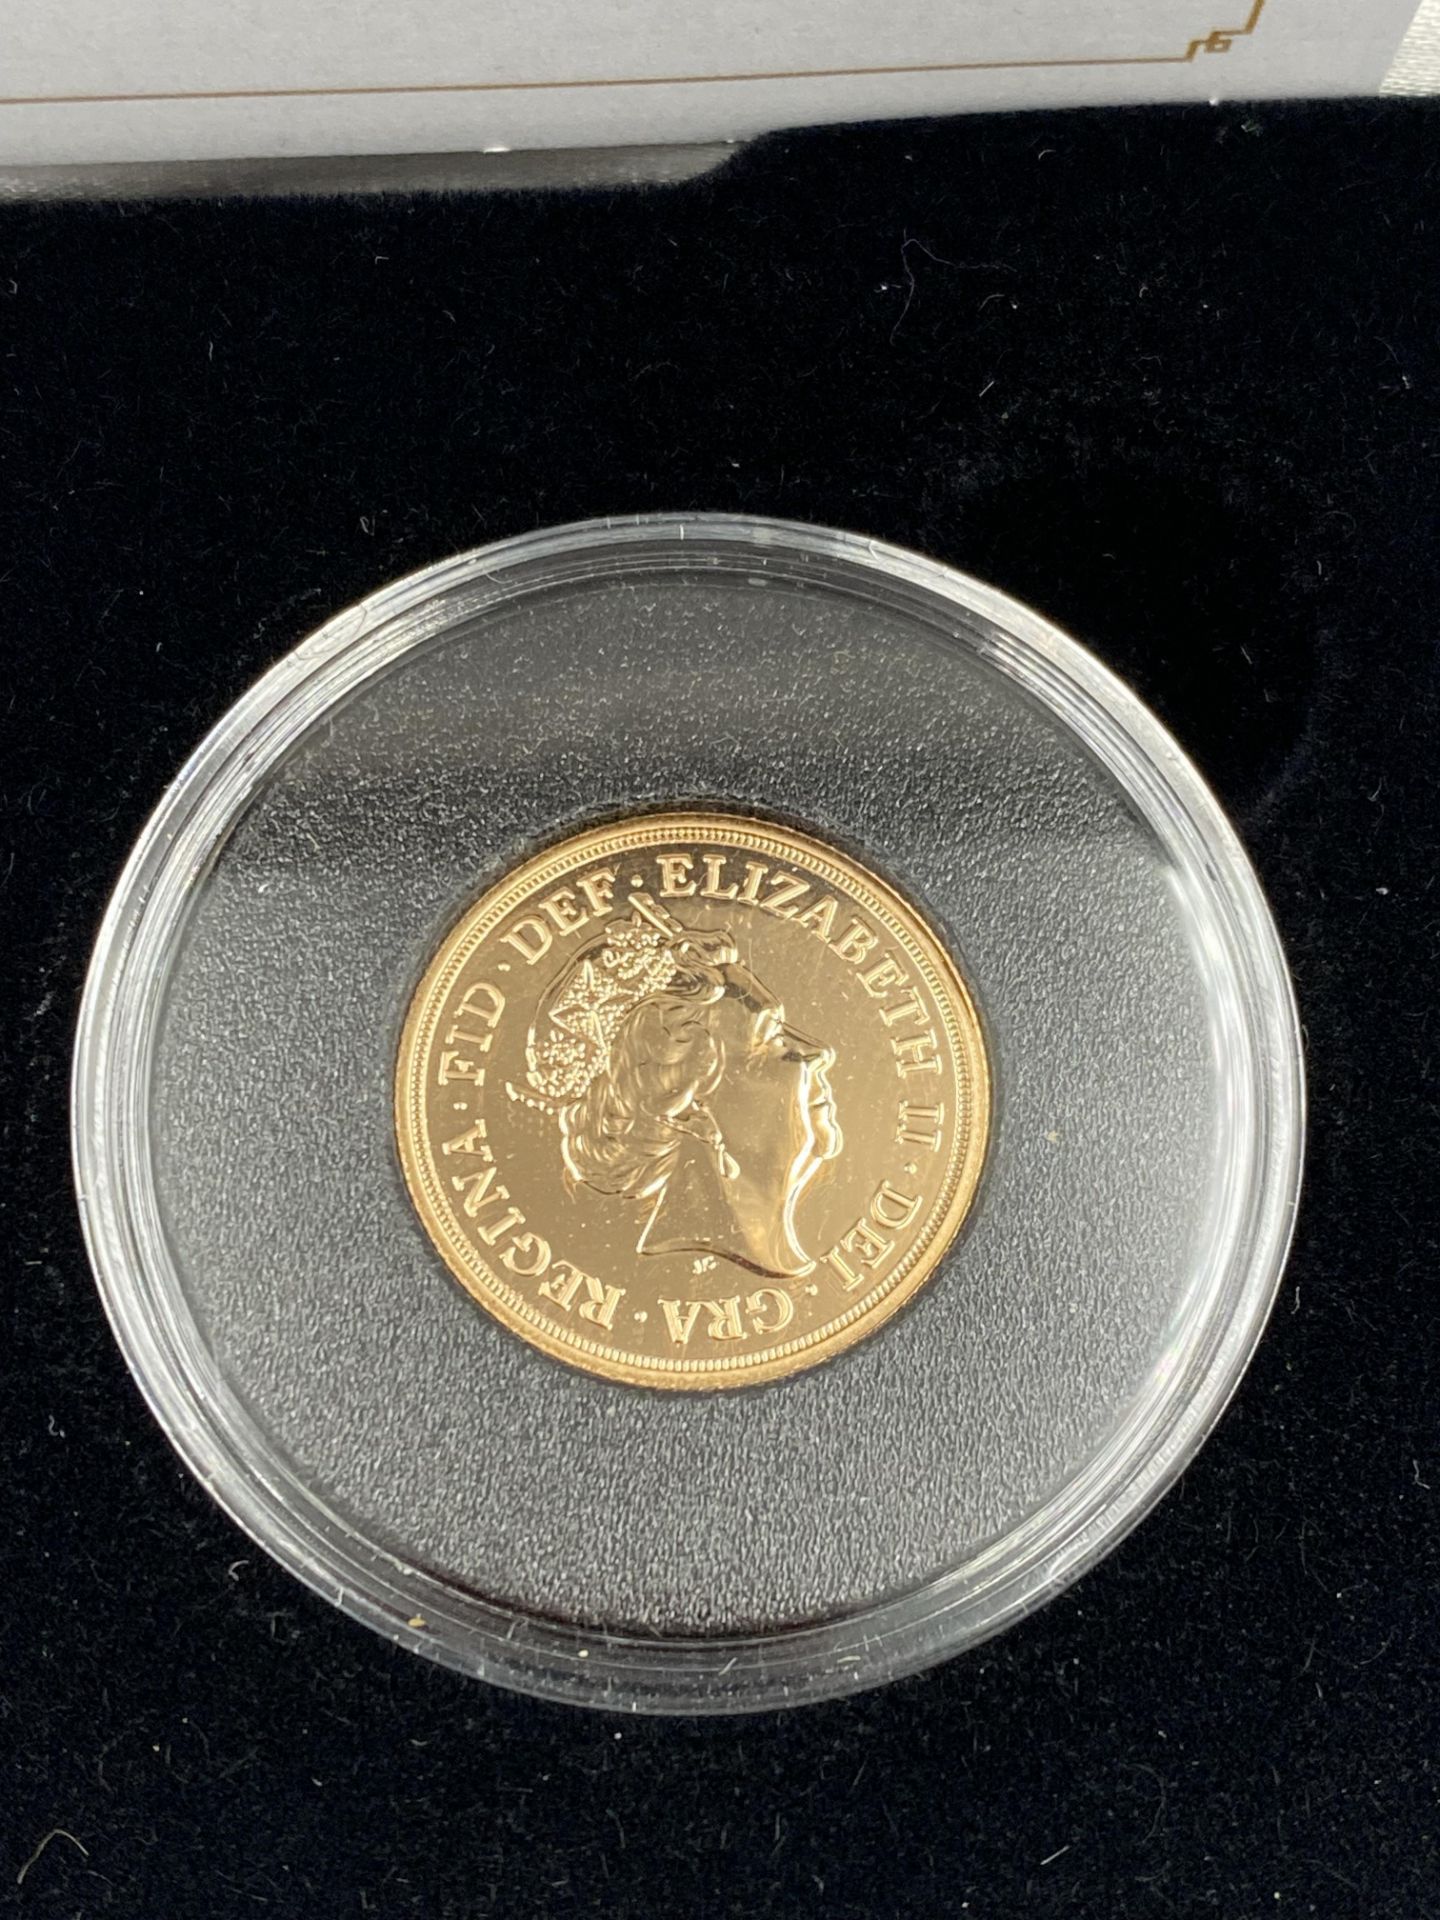 Jubilee Mint - Queen's 95th Birthday Gold Sovereign Pair - Image 4 of 5